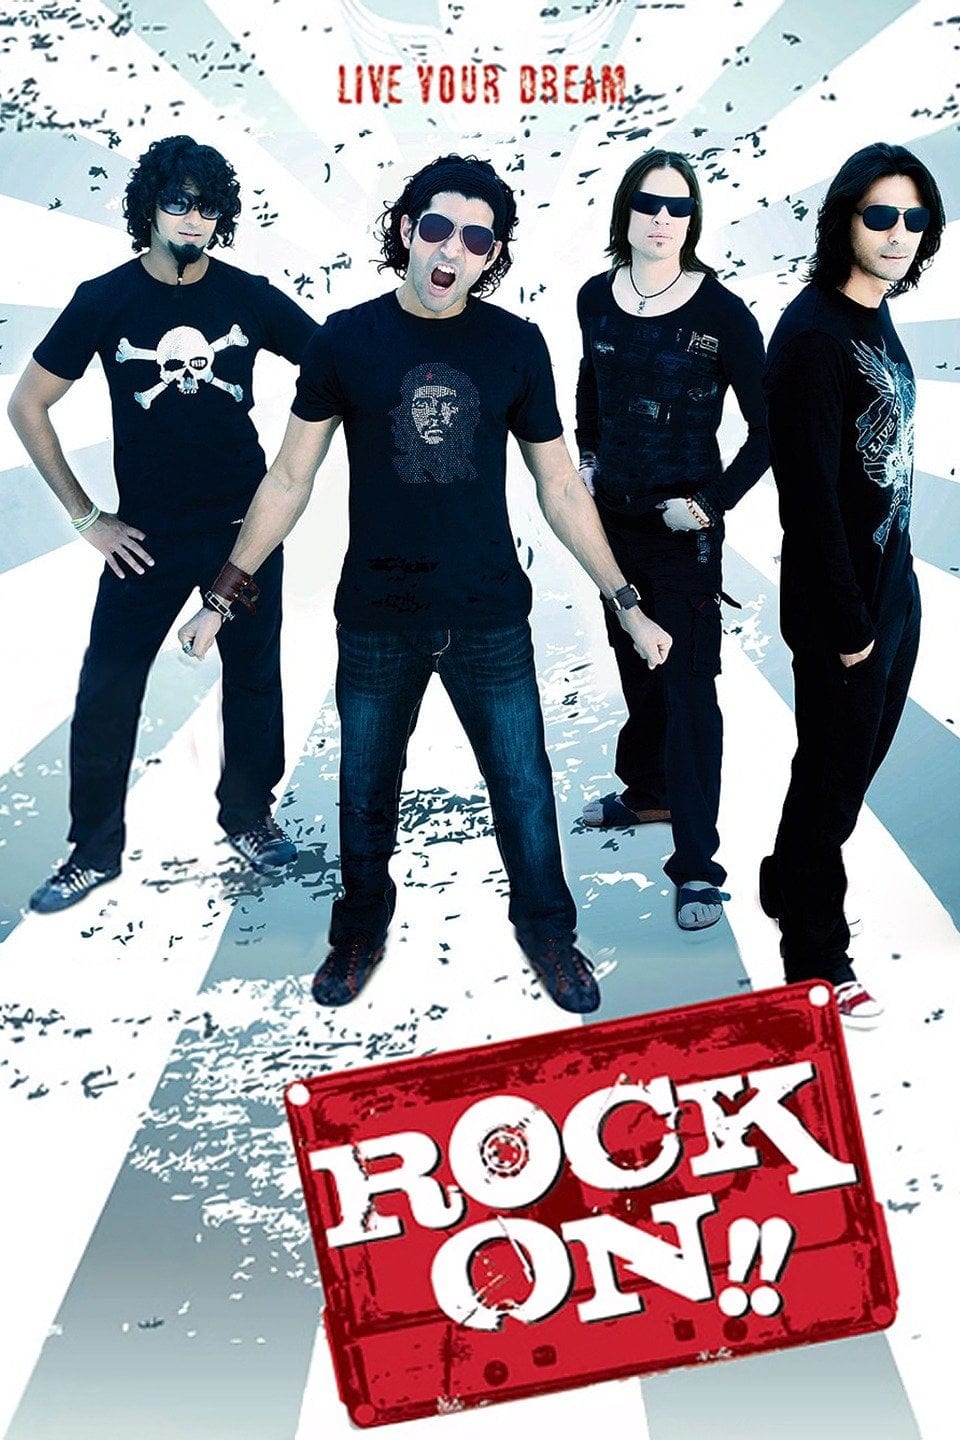 Poster for the movie "Rock On!!"